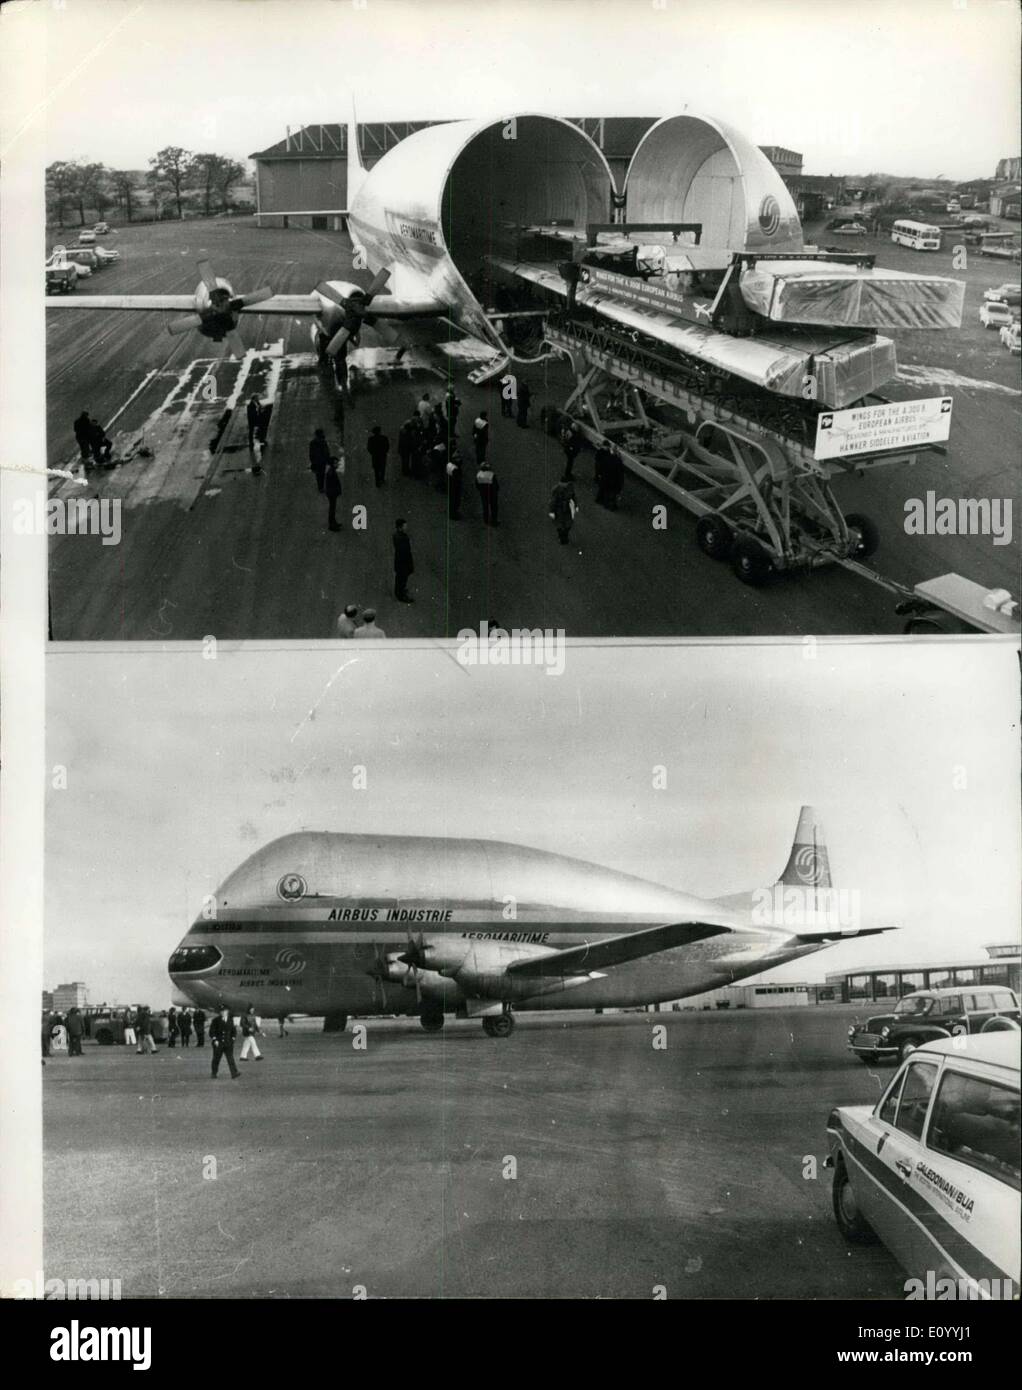 Nov. 24, 1971 - Wings For European Airbus Loaded Into Transport Aircraft. Top Picture: Delicate manoeuvrings as the first set of wings for the A300B European Airbus are loaded into a Super Guppy transport aircraft at Ringway Airport, Manchester, bound for Toulouse, France, where they will be joined to other parts built in Europe. The wings had been brought to the airport by road from Hawker Siddeley's factory in Chester. Hawker Siddley already building six wings for the airbus, announced yesterday it had received orders for eight more wings Stock Photo